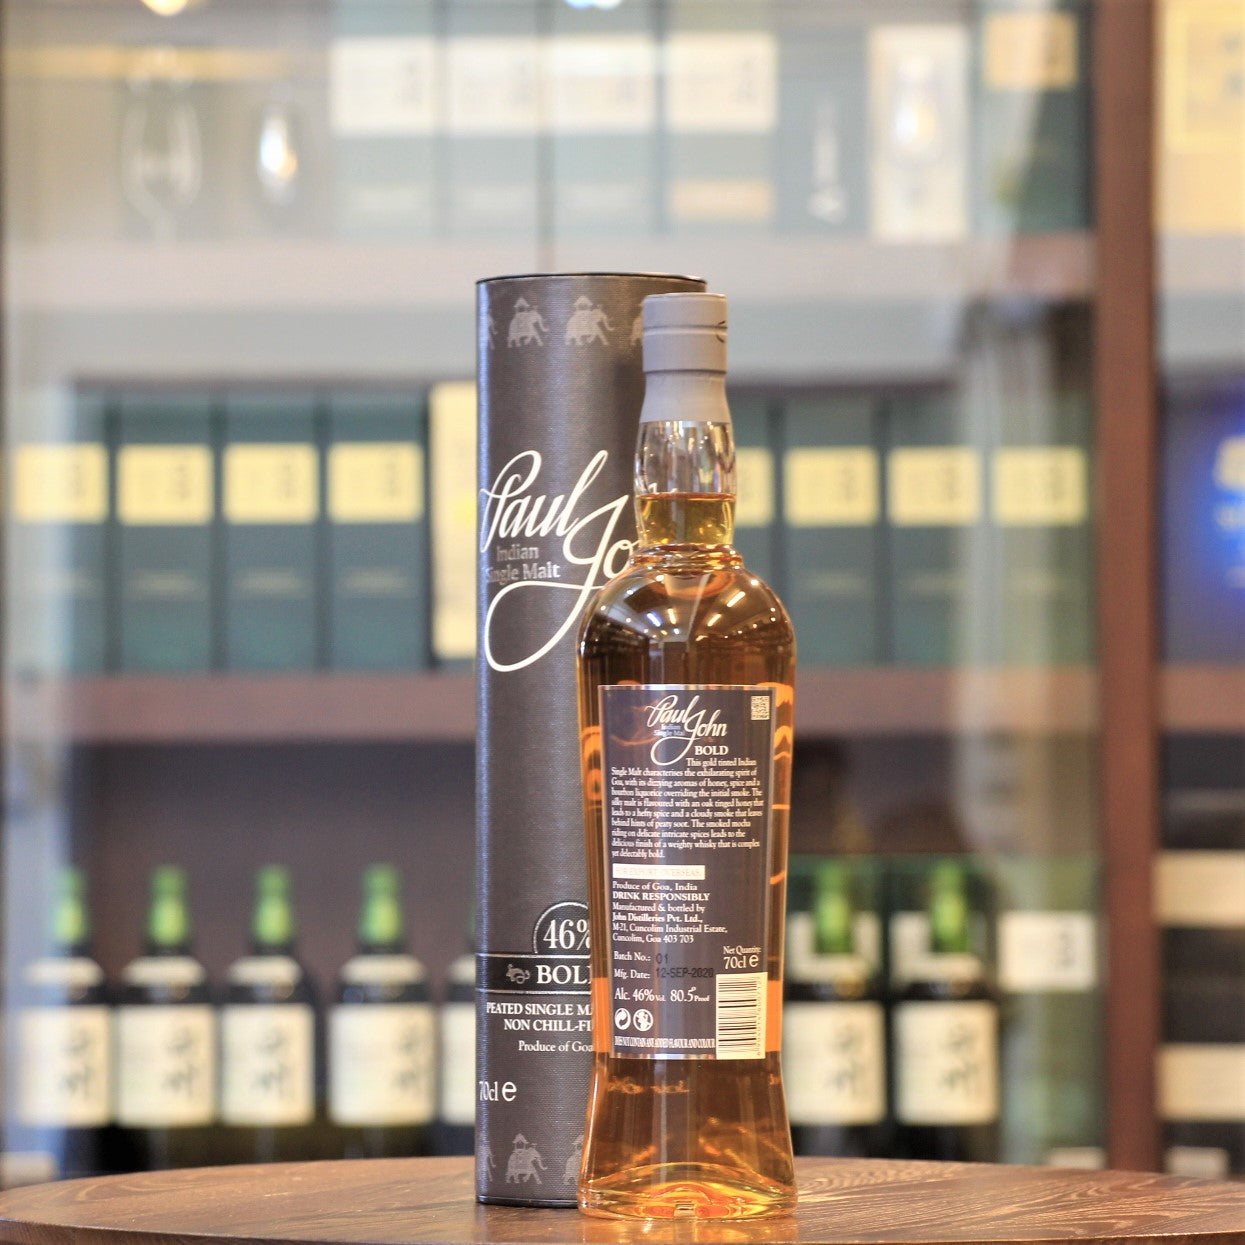 This is the third bottle in their Flagship Range consisting of Brilliance, Edited and Bold. Living up to its name, Paul John Bold excels as peat is brought over to Goa from Islay for Bold, where it is used to dry their 6-row Indian barley.